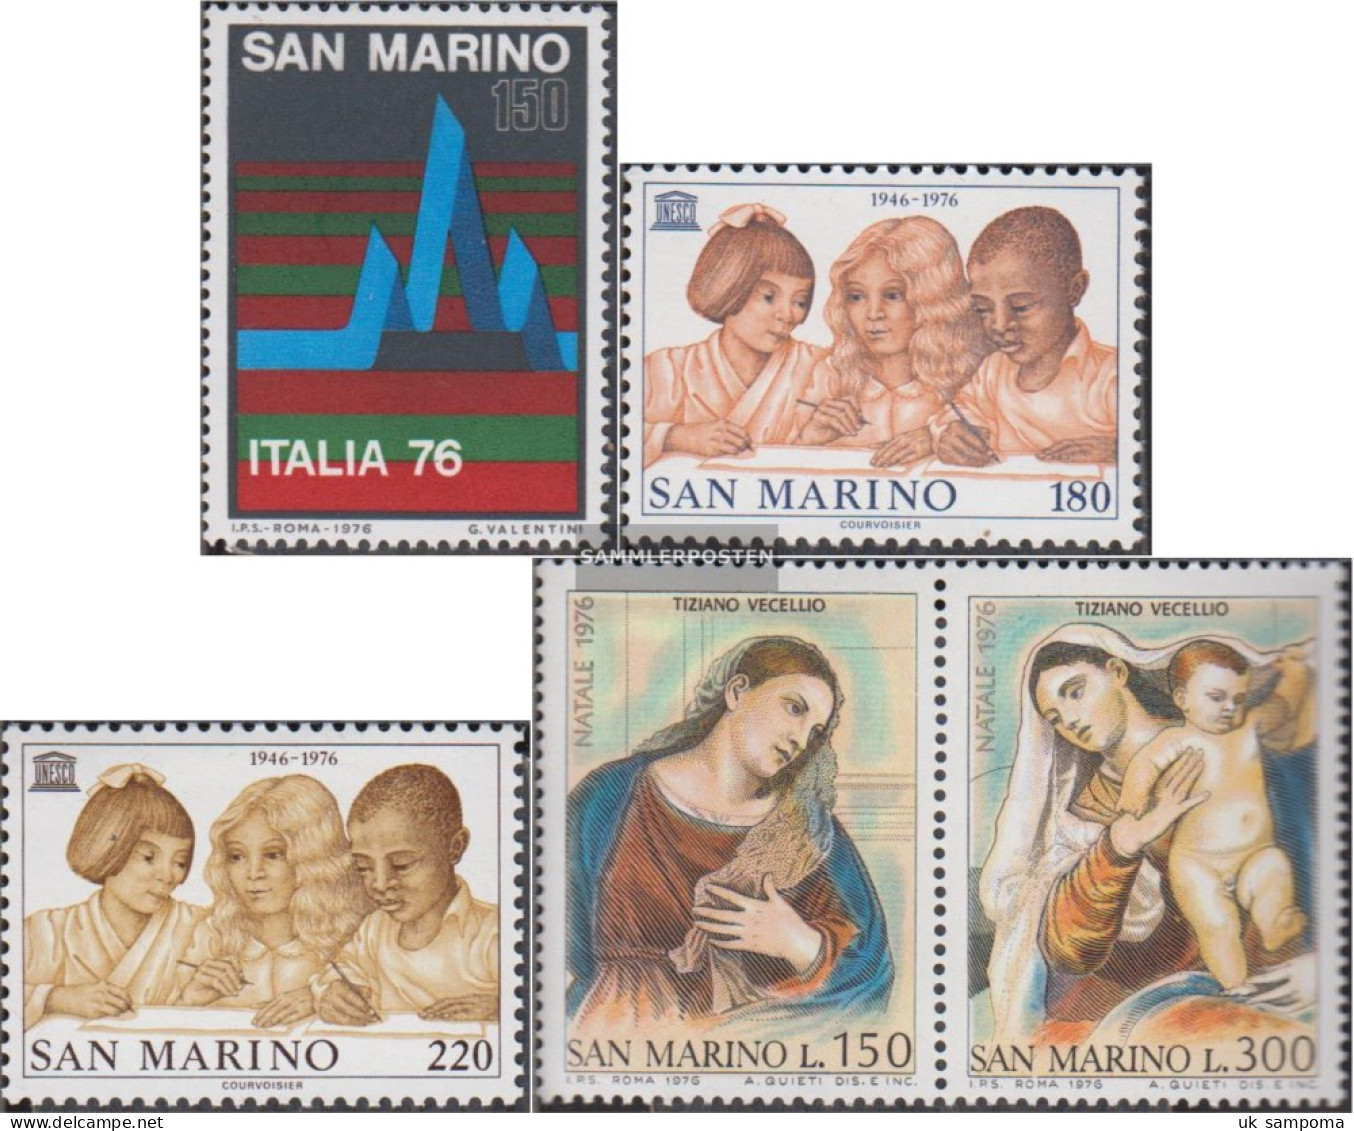 San Marino 1122,1123-1124,1125-1126 Couple (complete Issue) Unmounted Mint / Never Hinged 1976 Philately, UNESCO, Christ - Ungebraucht